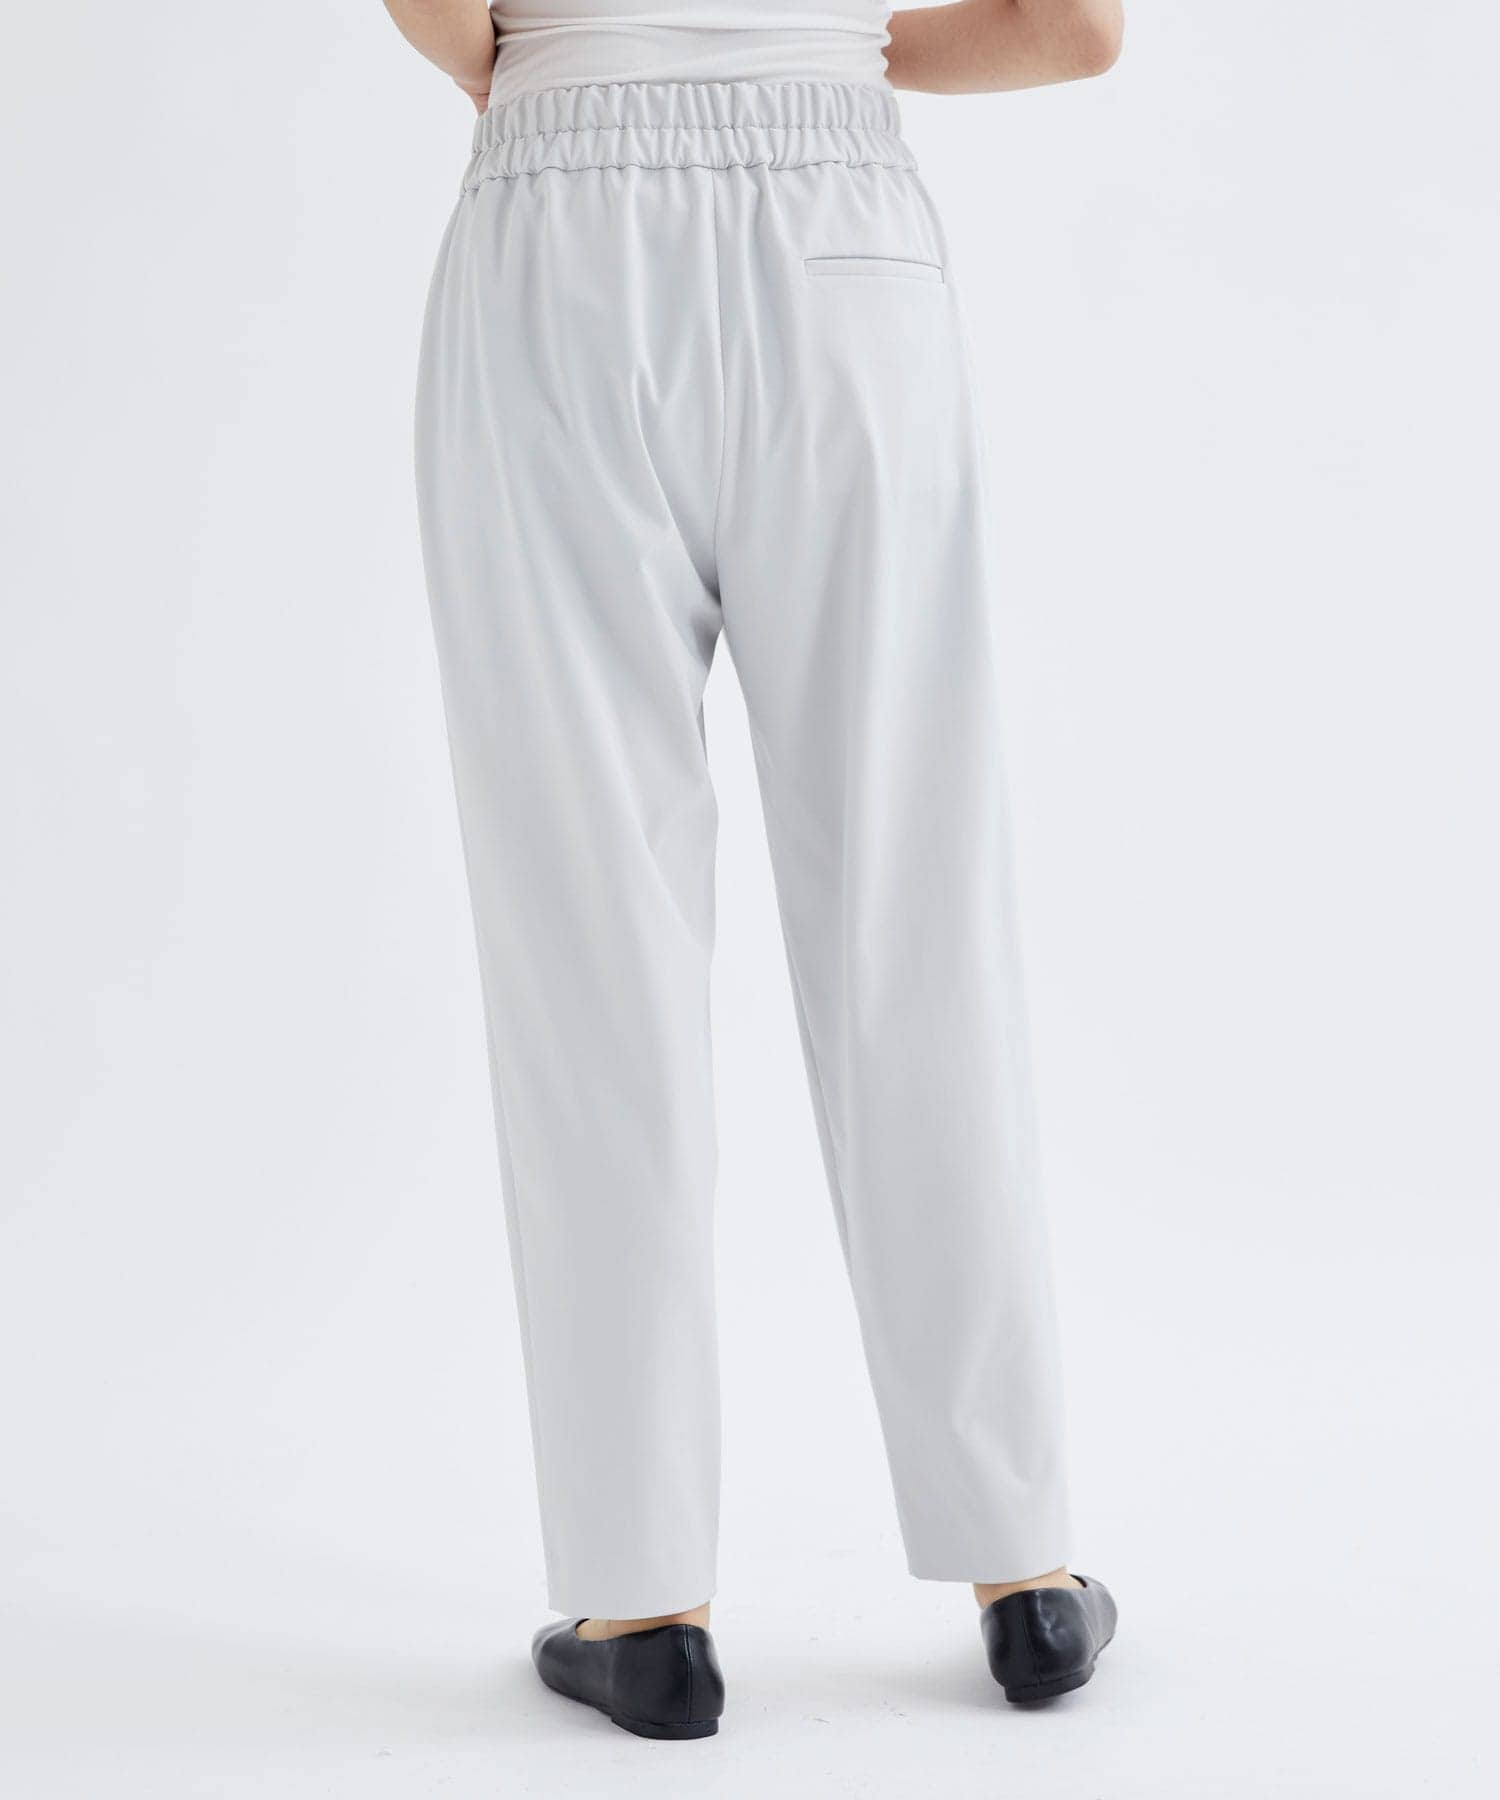 WASHABLE HIGH FANCTION TAPERD PANTS THE PERMANENT EYE